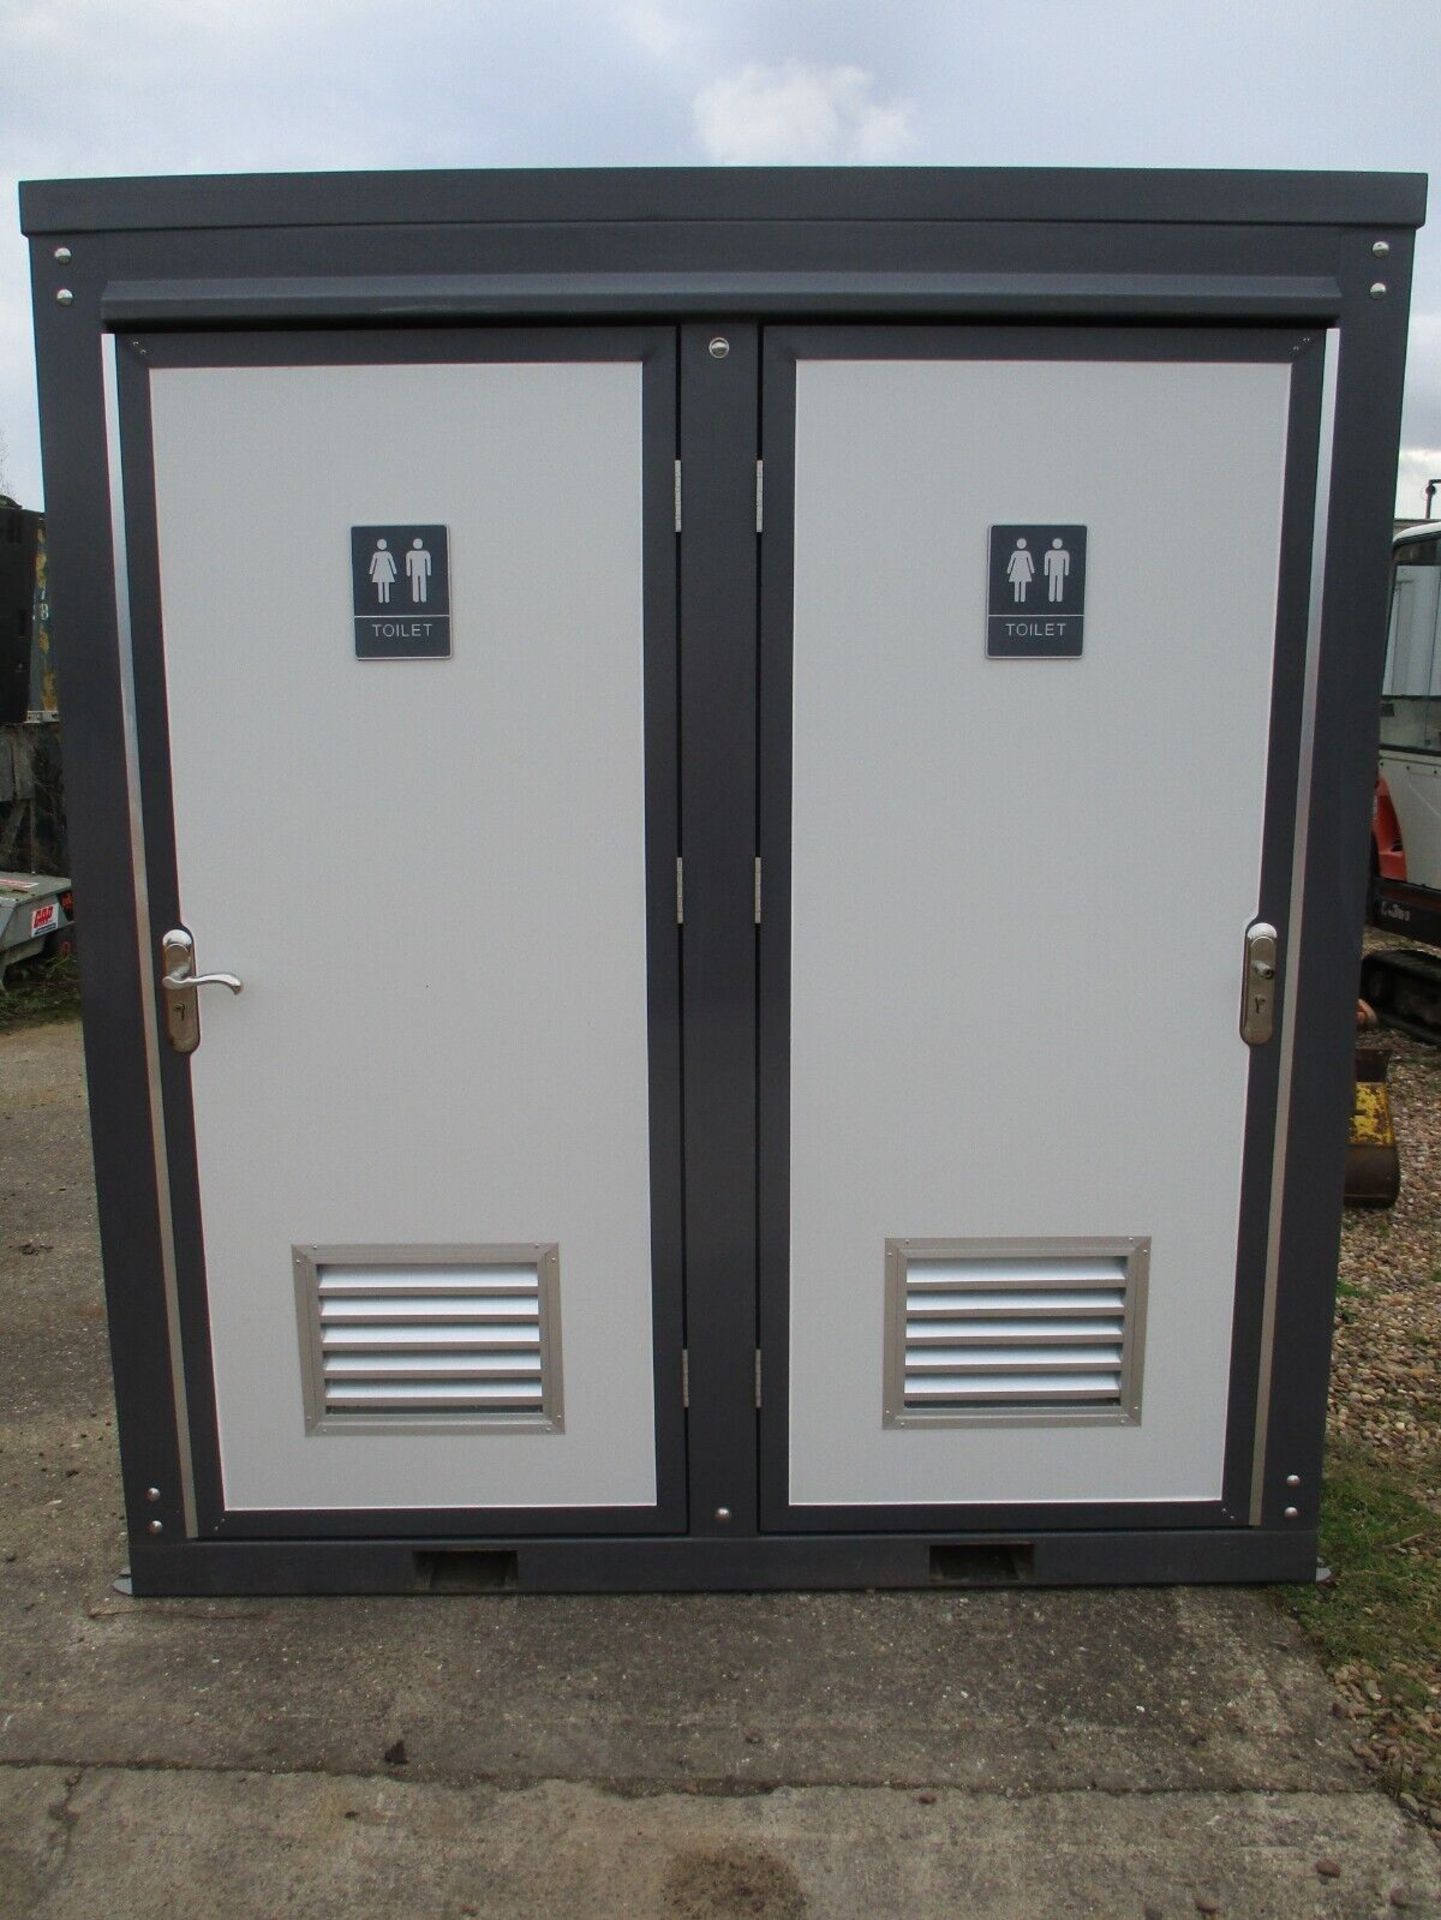 2.15M X 1.3M DOUBLE TOILET BLOCK SECURE SHIPPING CONTAINER